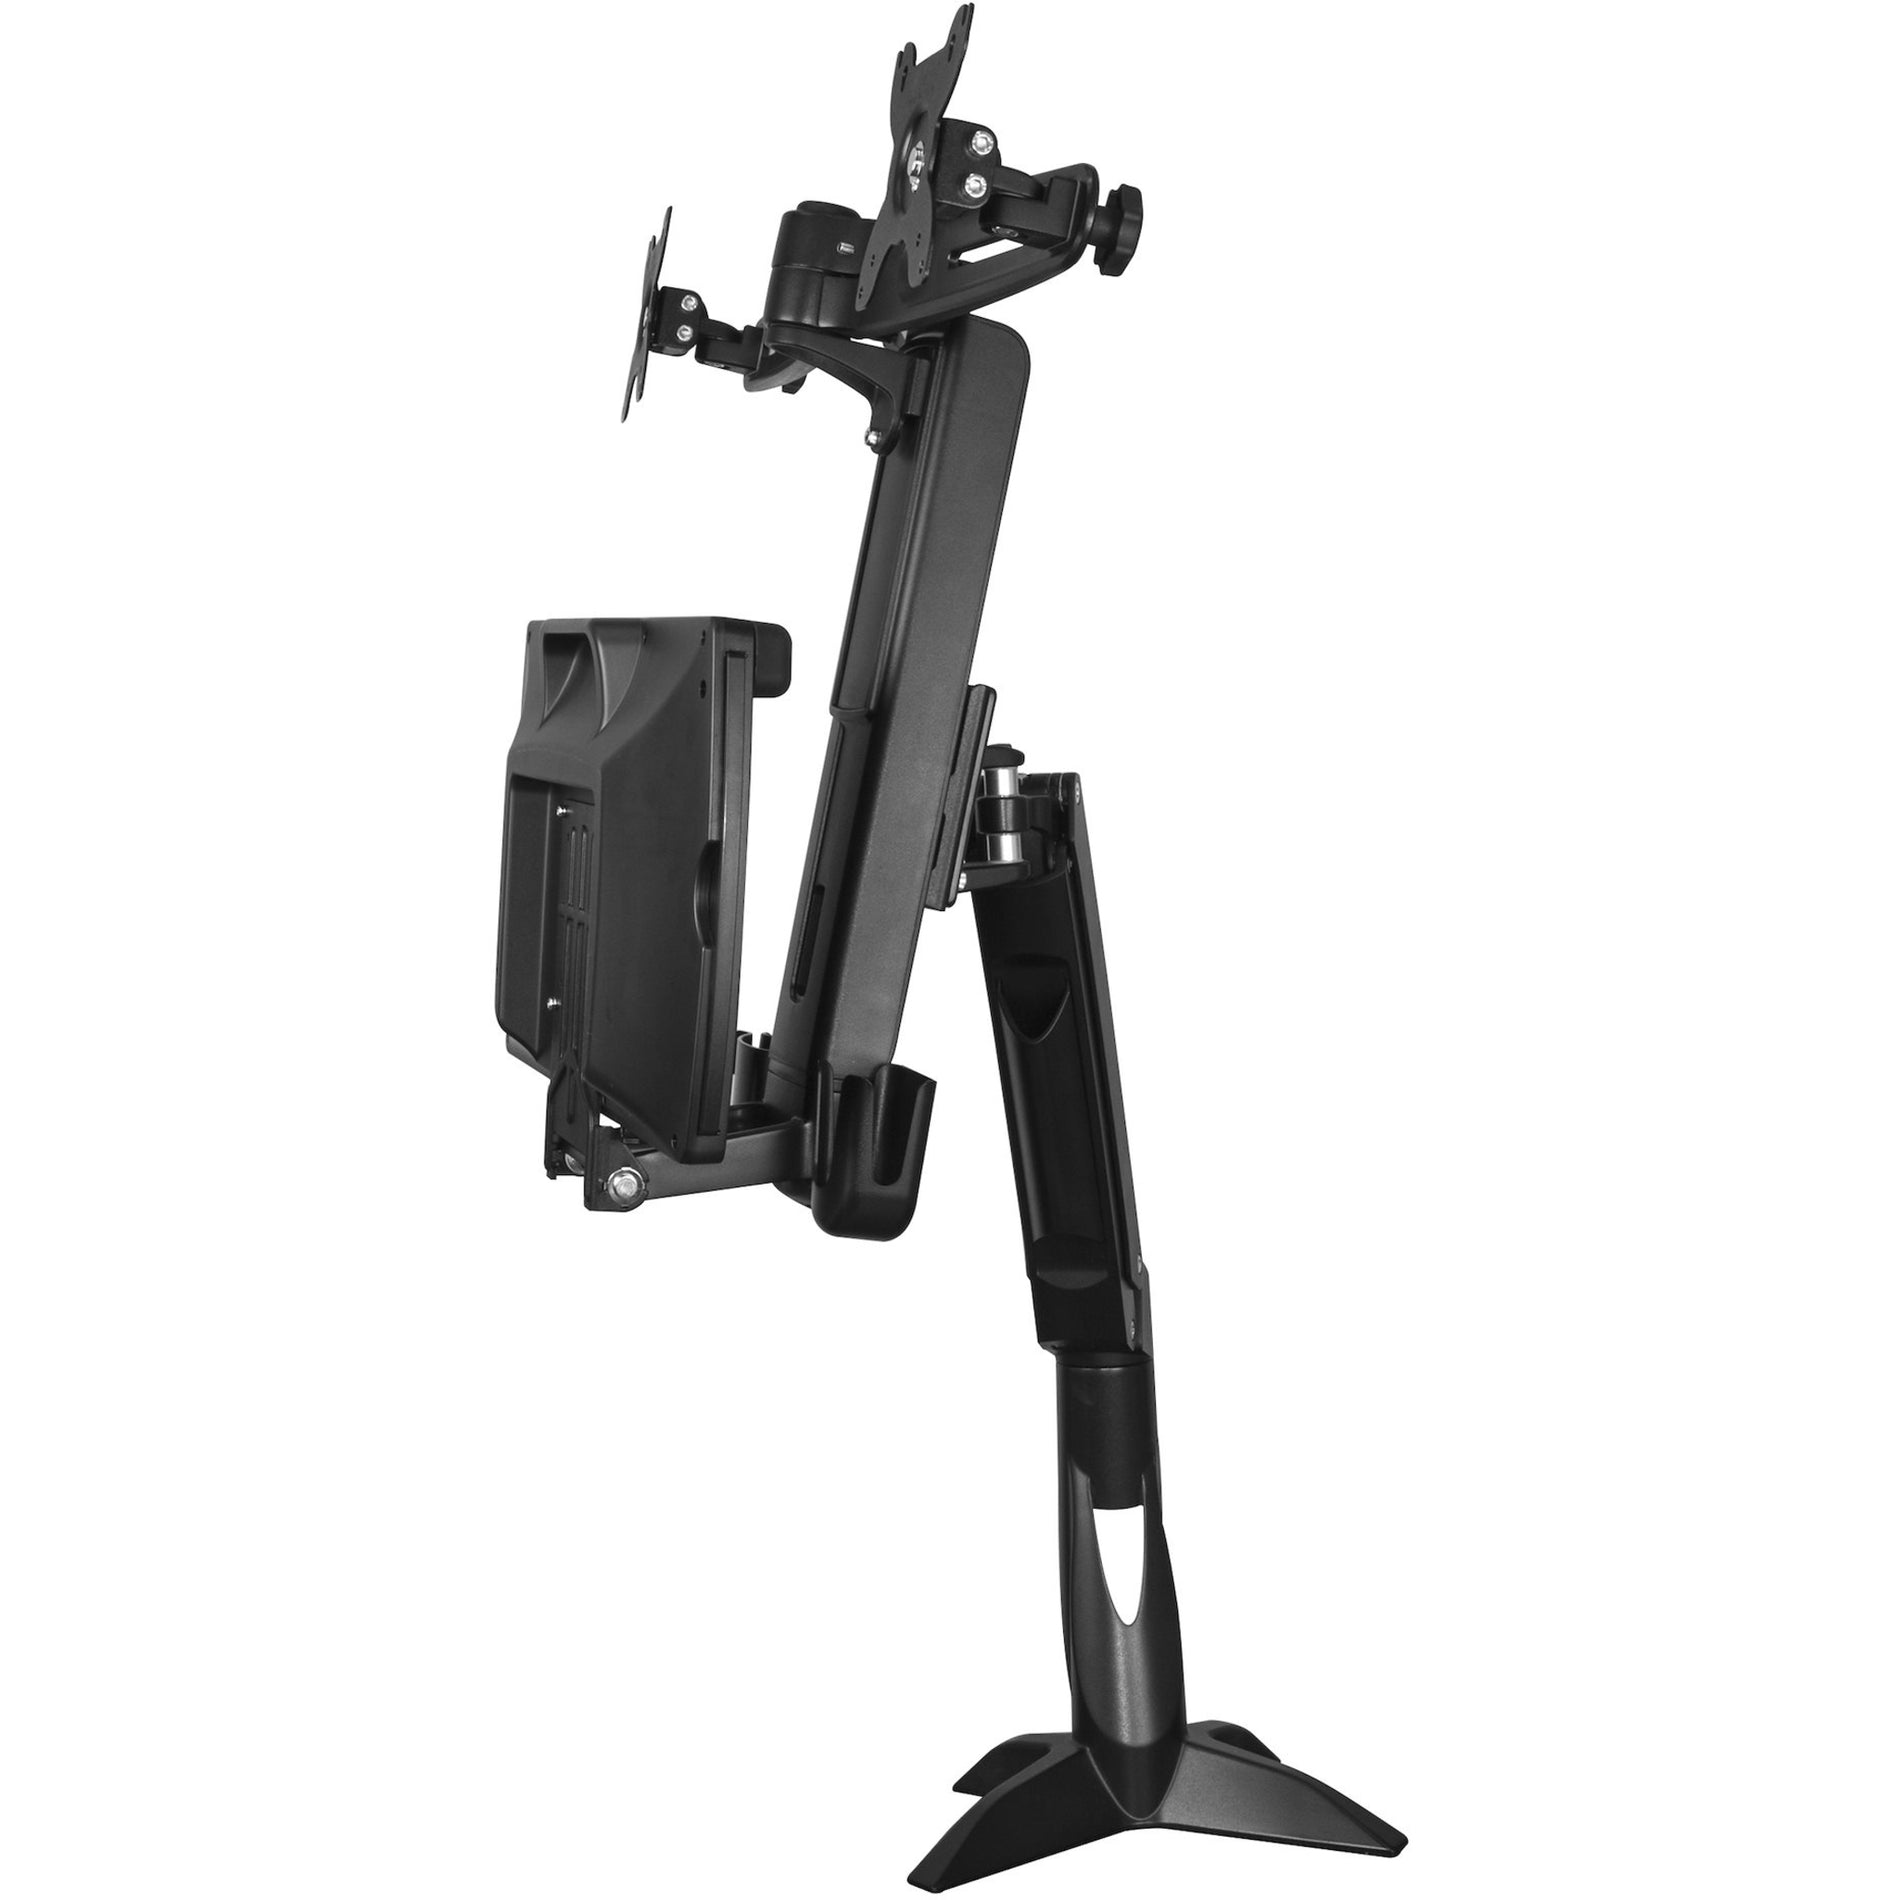 StarTech.com ARMSTSCP2 Sit-Stand Dual-Monitor Arm, Height Adjustable Ergonomic Desk, Holds Two VESA Mount Monitors up to 24in [Discontinued]